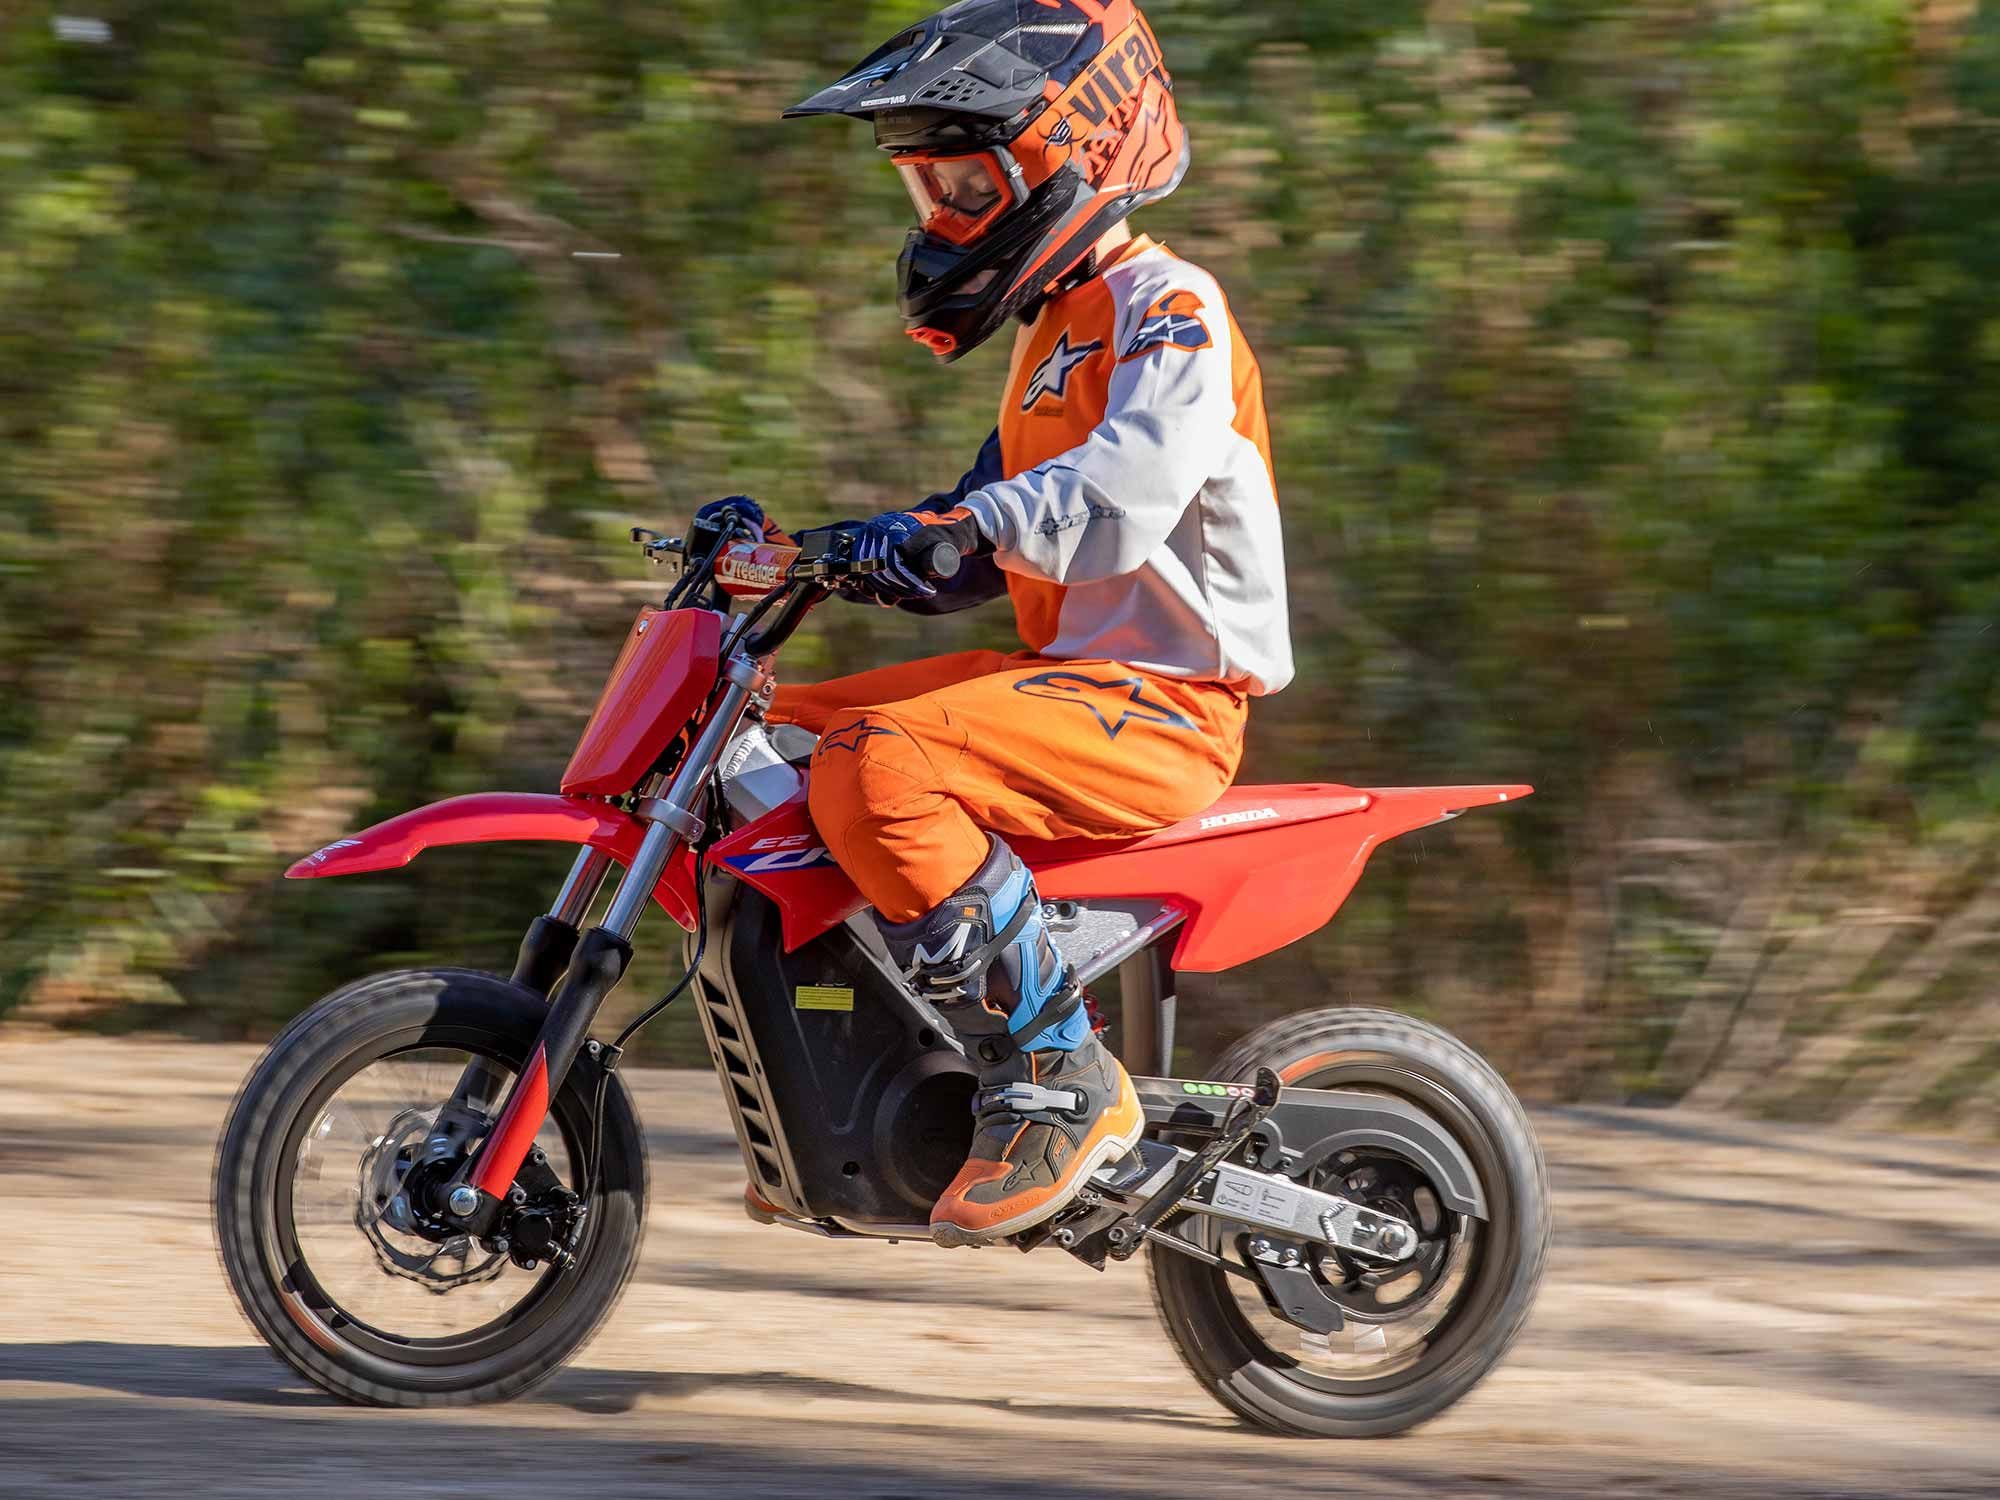 The $2,950 Greenger Honda CRF-E2 is an officially licensed electric dirt bike sold exclusively at US Honda dealers.